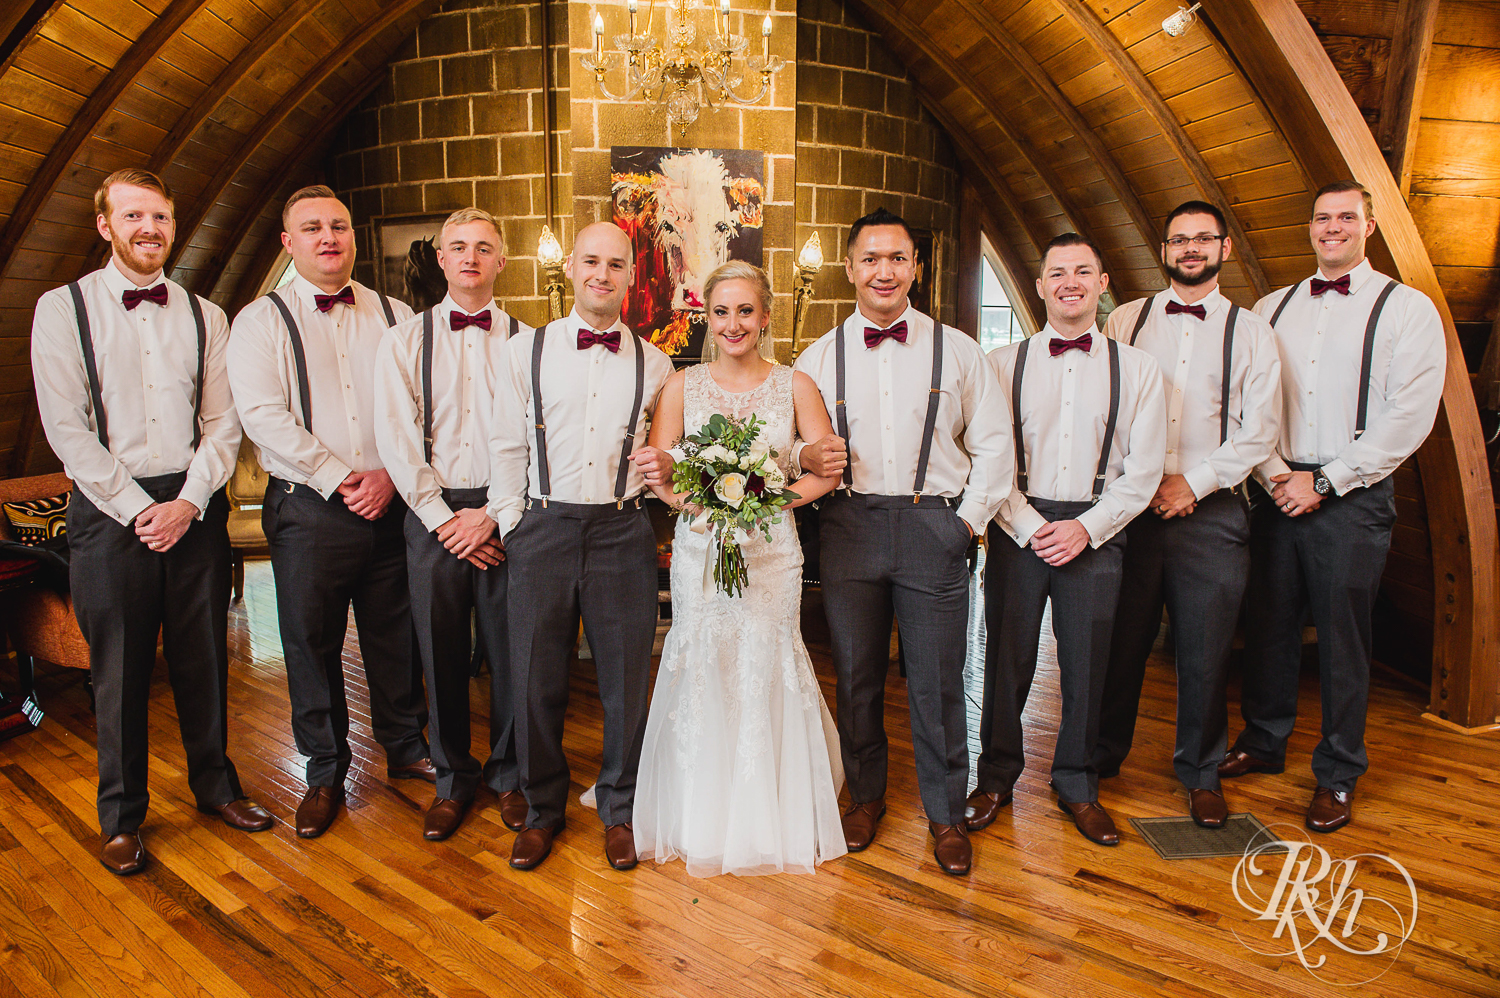 Bride smiles with wedding party at Green Acres Event Center barn wedding in Eden Prairie, Minnesota.